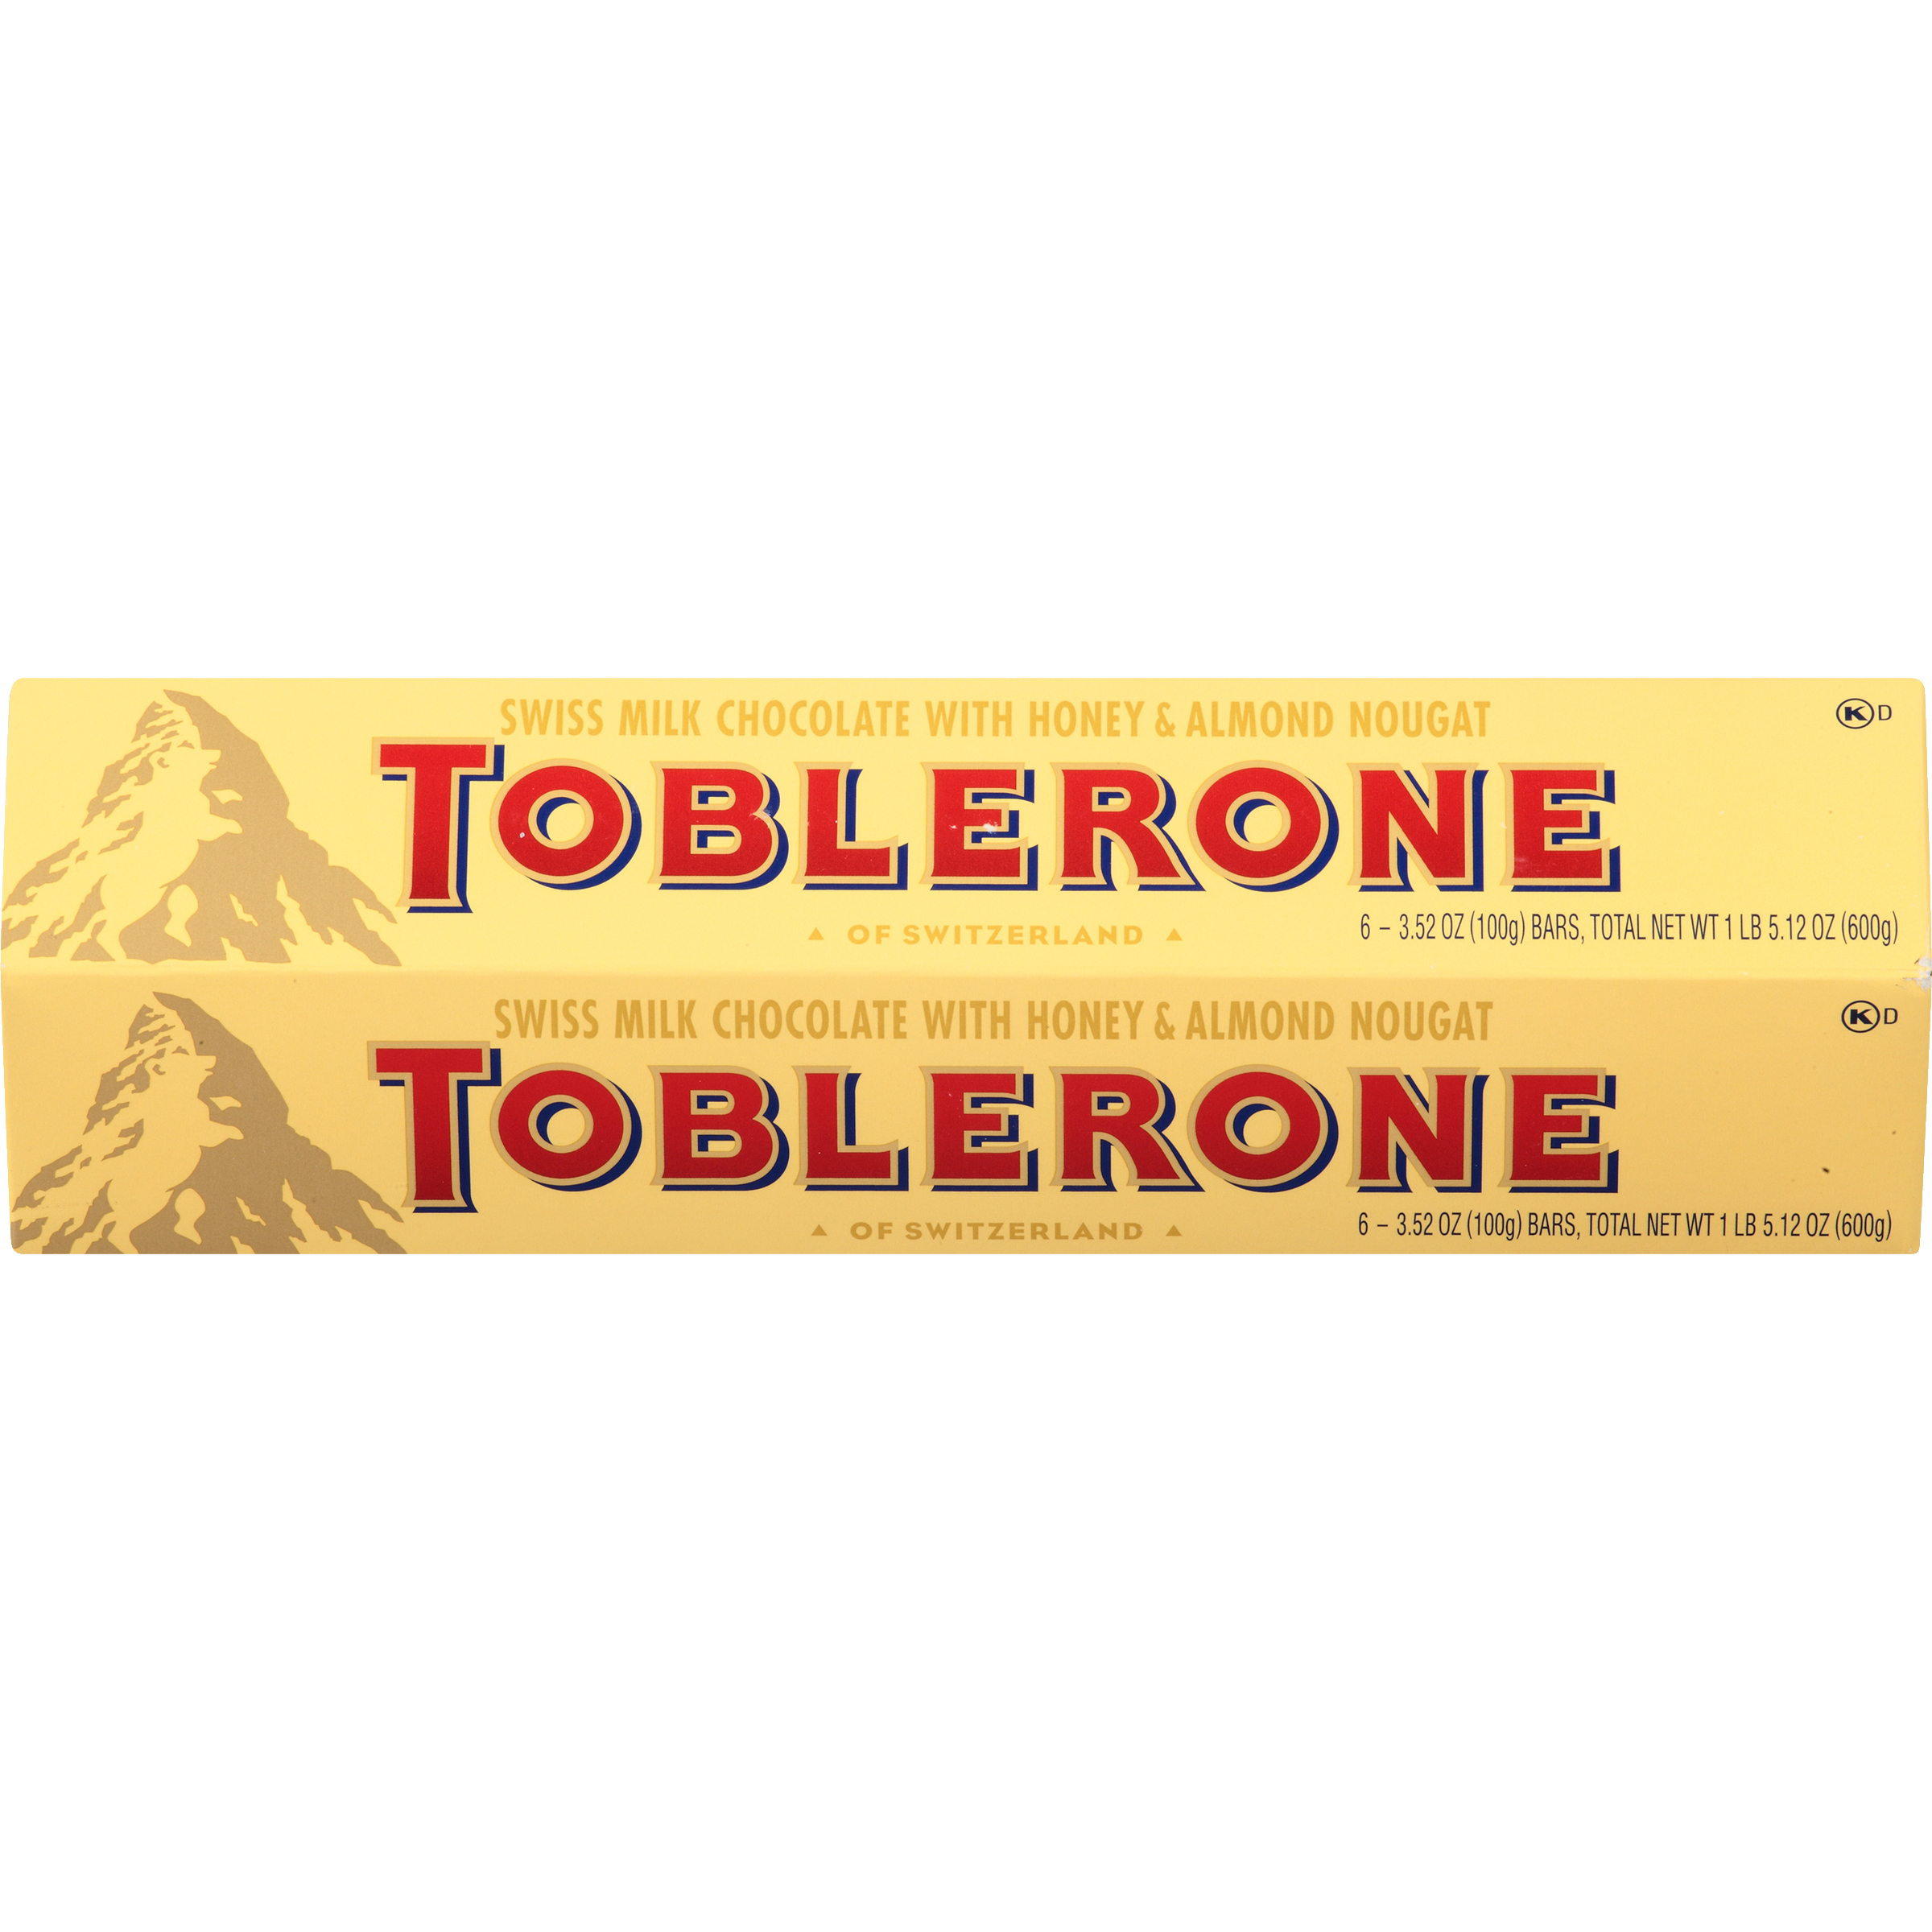 Toblerone Swiss Milk Chocolate Candy Bars with Honey and Almond Nougat, 6 - 3.52 oz Bars-6